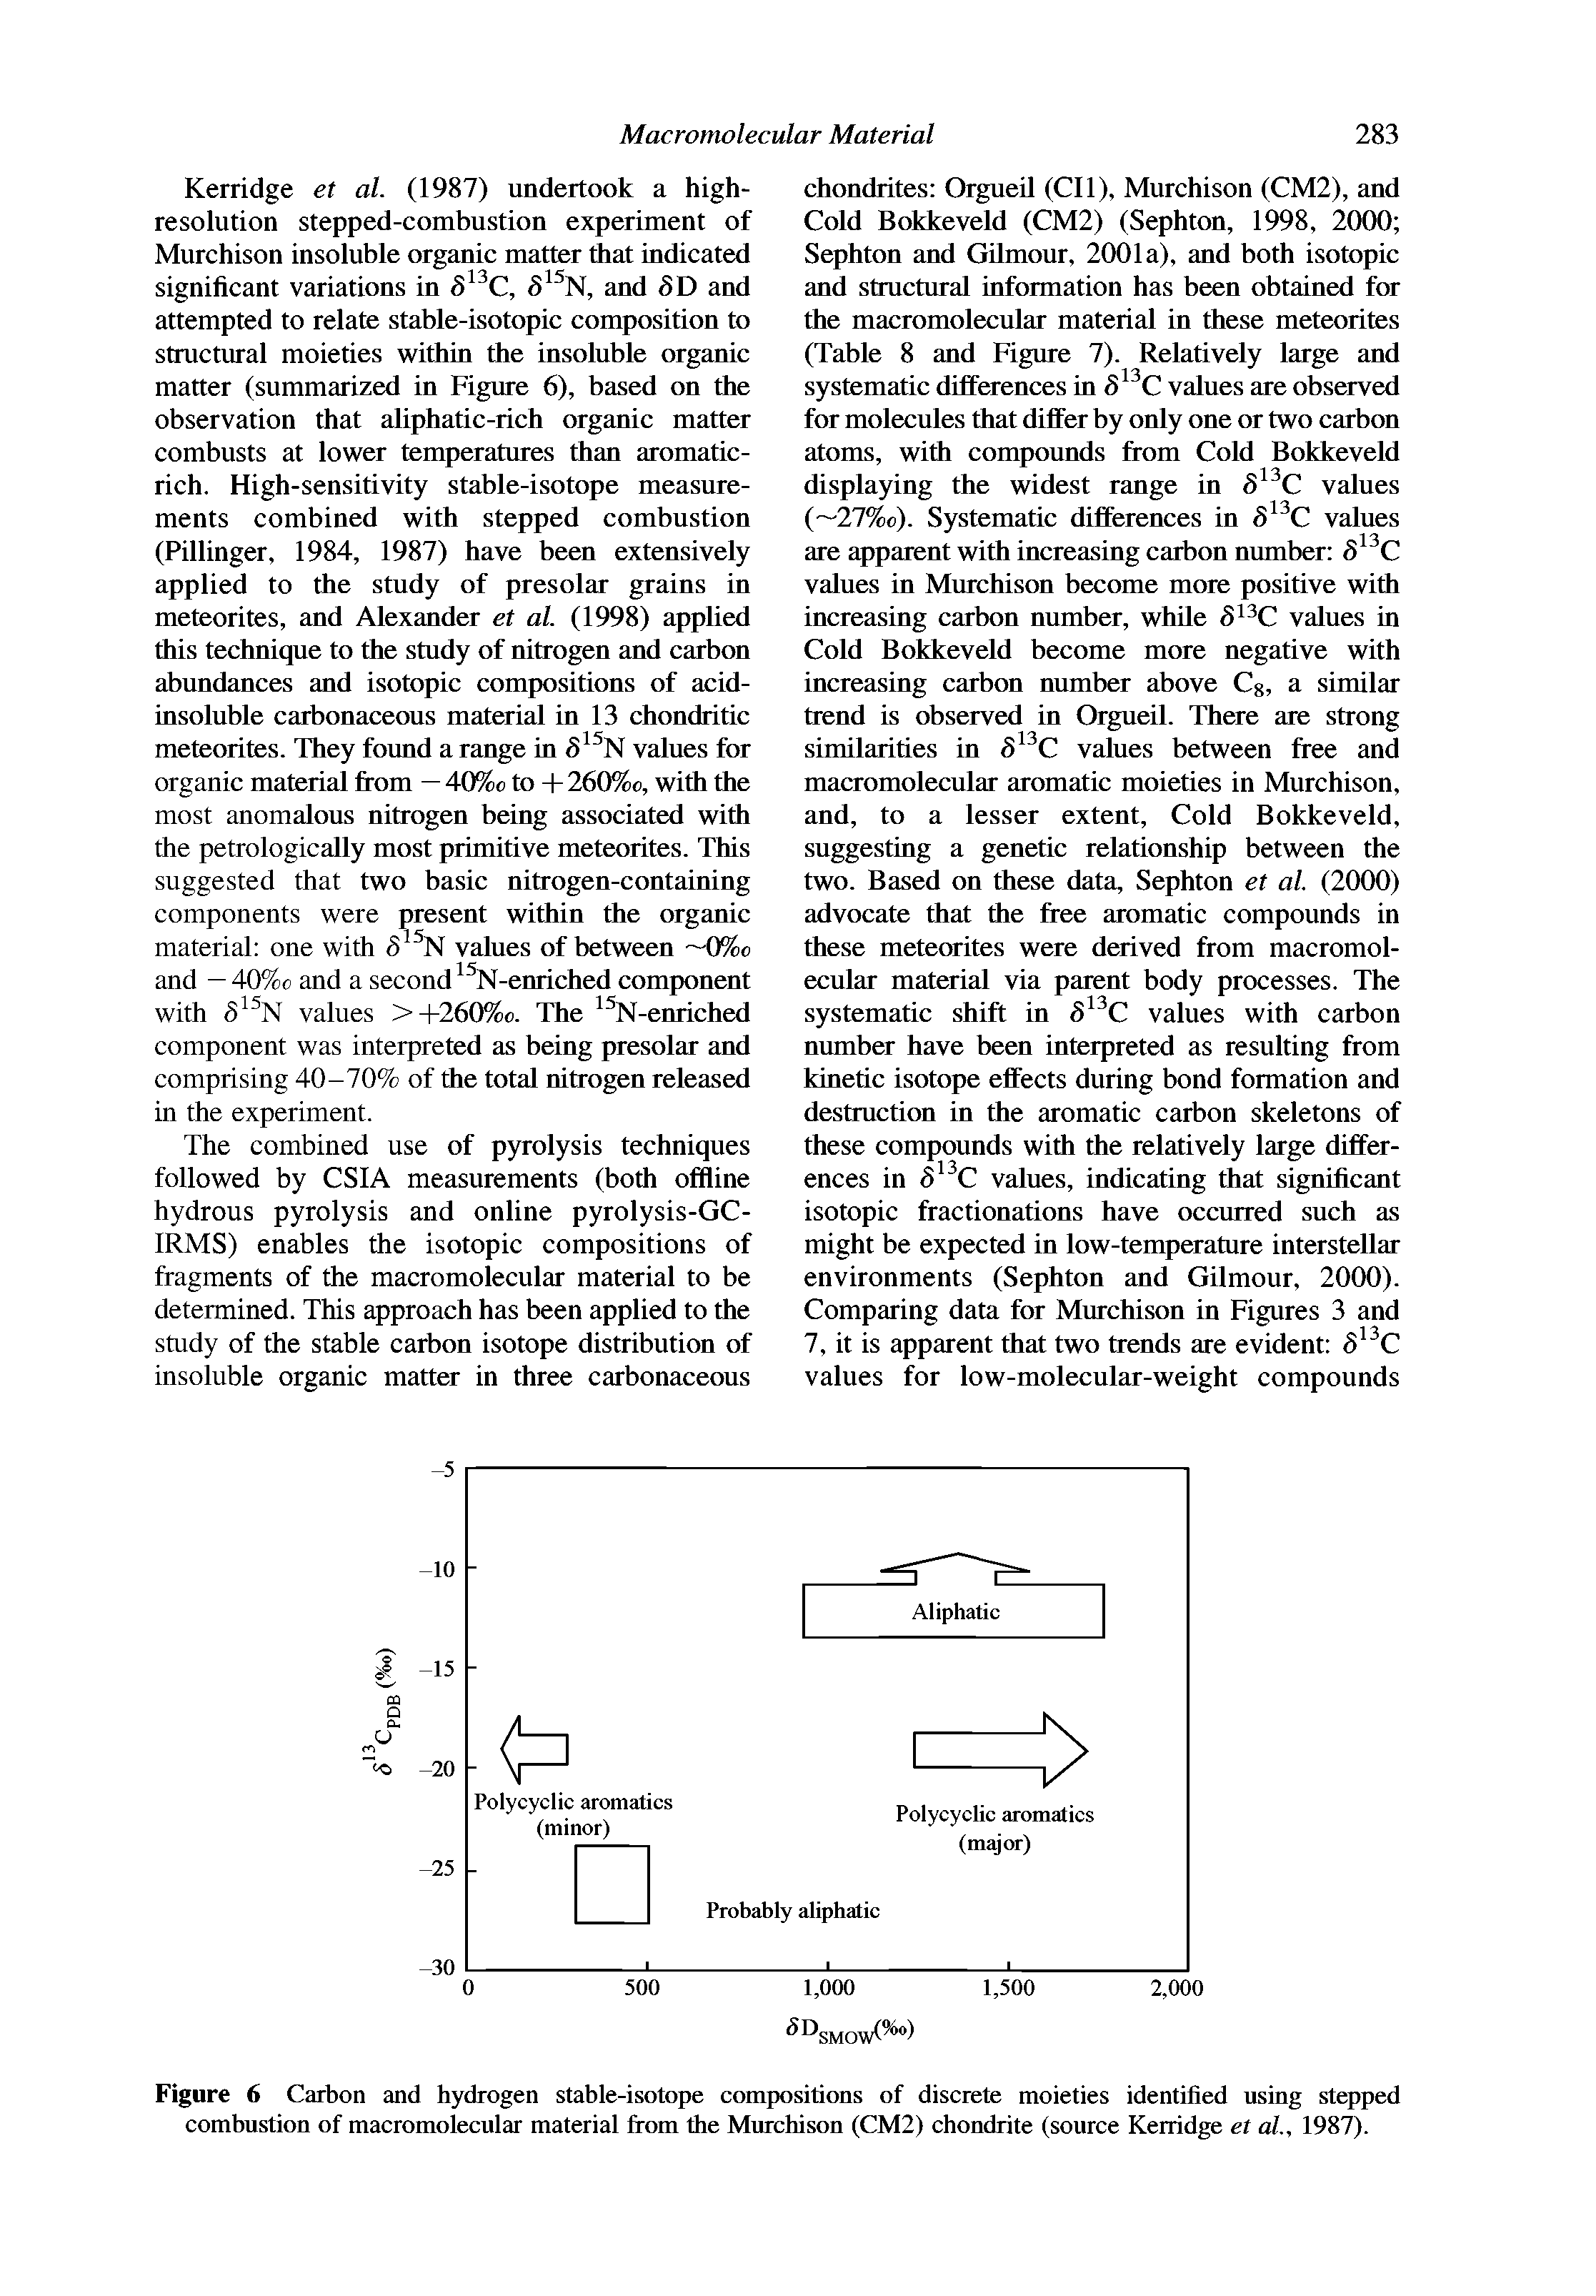 Figure 6 Carbon and hydrogen stable-isotope compositions of discrete moieties identified using stepped combustion of macromolecular material from the Murchison (CM2) chondrite (source Kerridge et al., 1987).